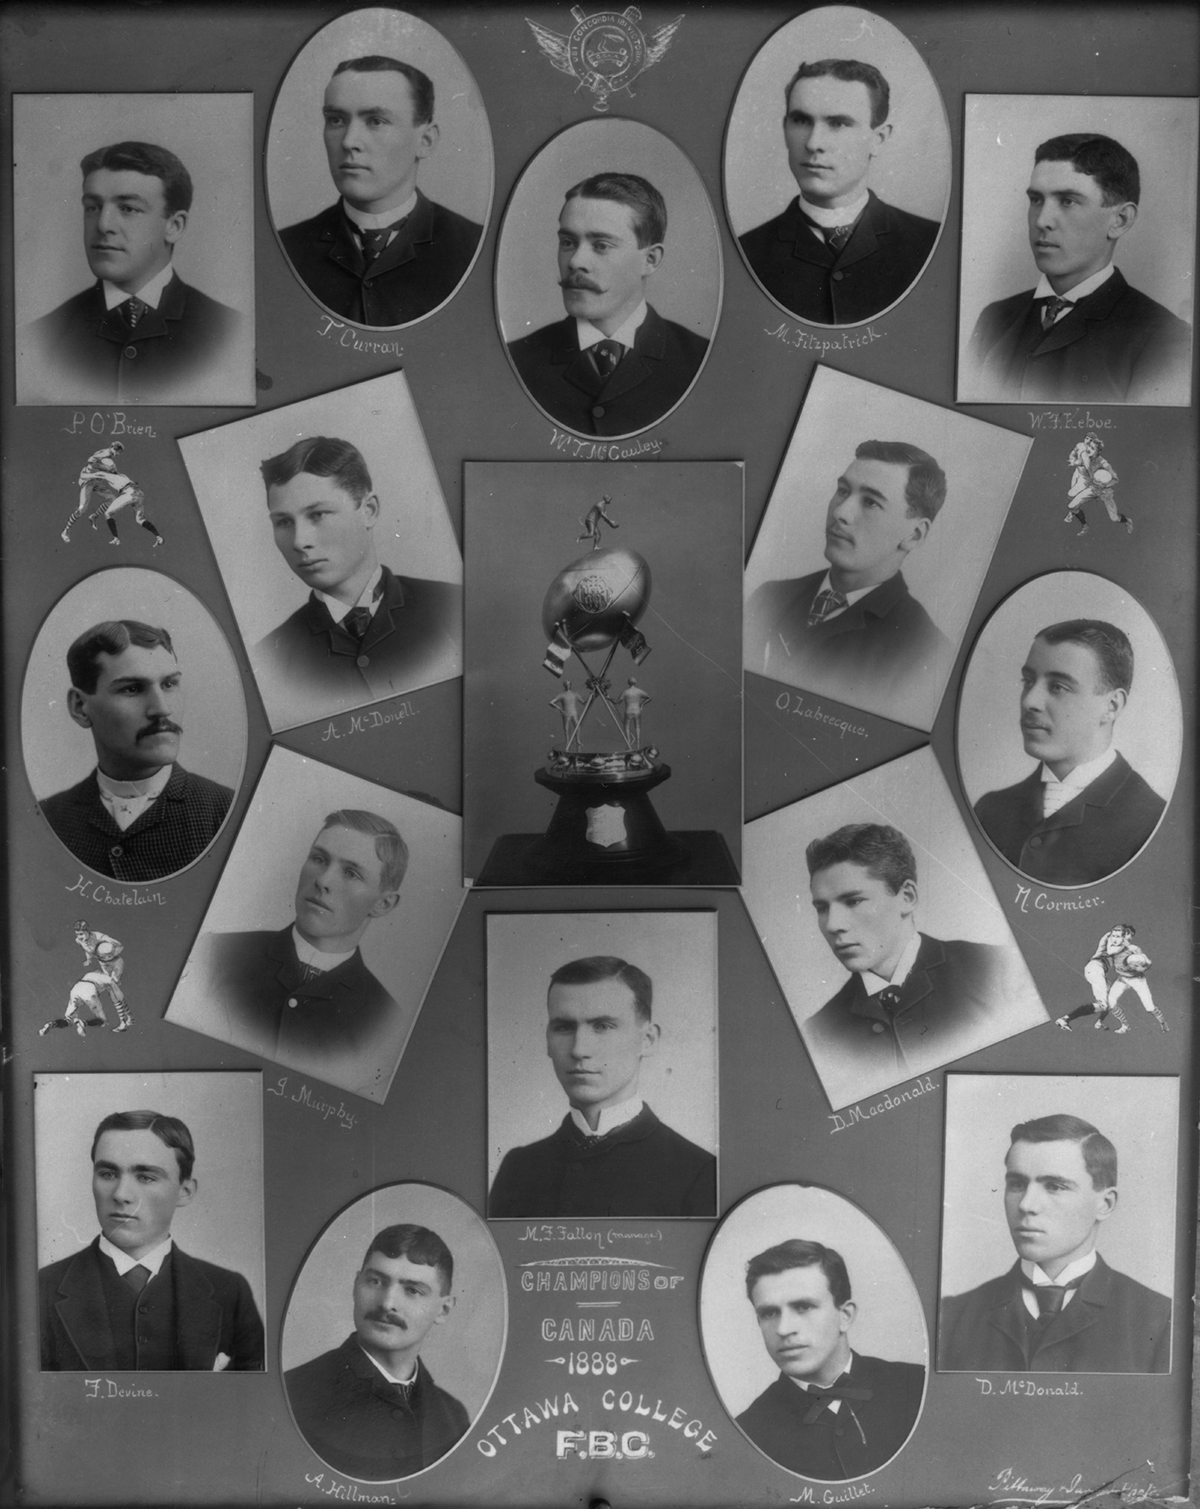 Portraits of individual football players in student clothing, surrounding a central photo of a trophy. Text at bottom reads "Champions of Canada, 1888".